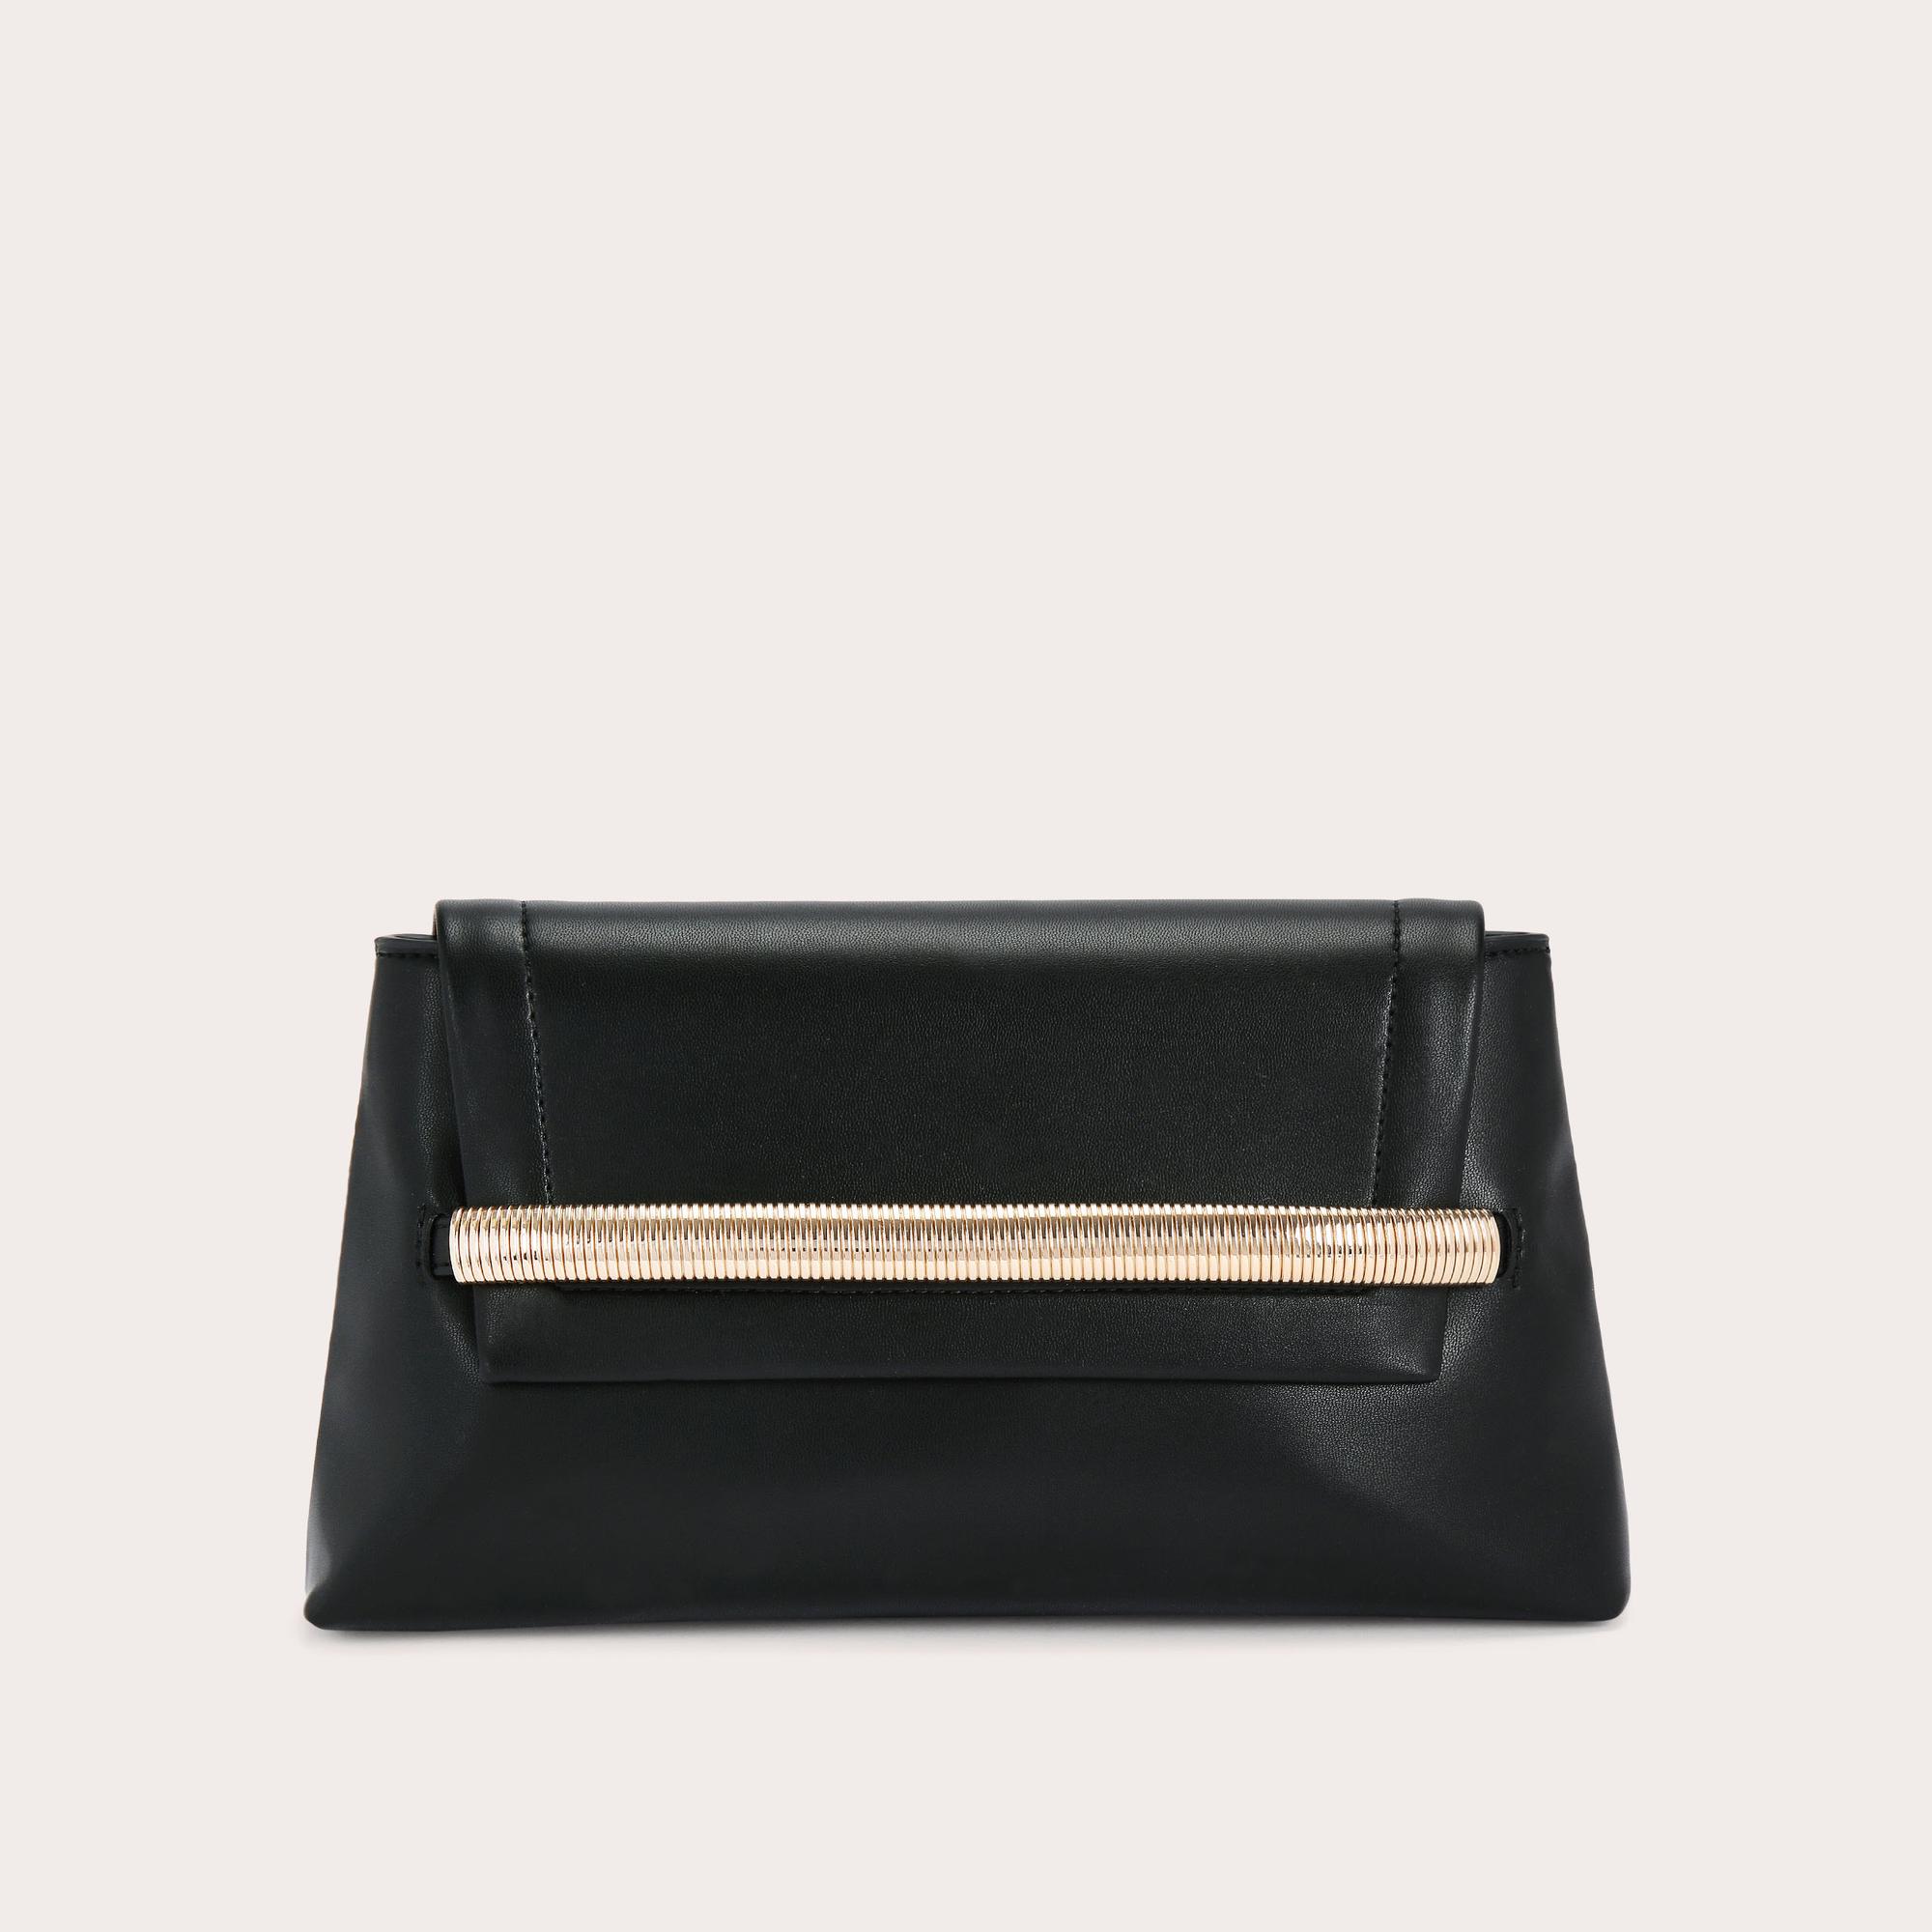 Clutch & Evening Bags, Nude, Black, Embellished & Chain